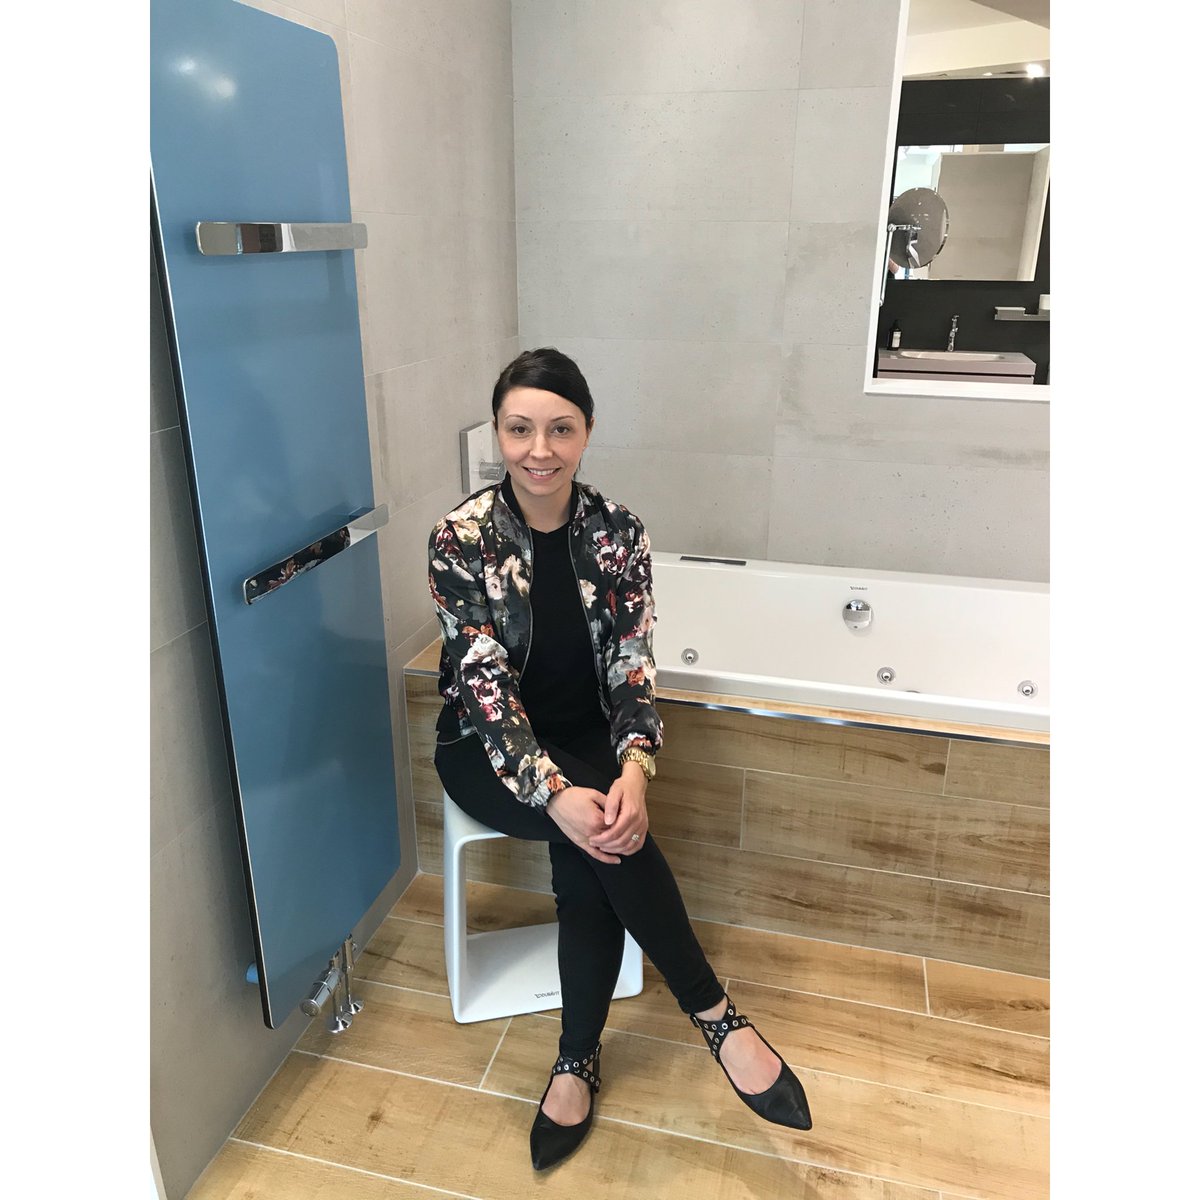 Meet the designer! Lee-Anne is one of our Bathroom Designers - she has many years' design experience & has shared her favourite bathroom trend with us: 'Natural materials are currently inspiring much of the bathroom industry. I particularly love pairing marble with wood.'